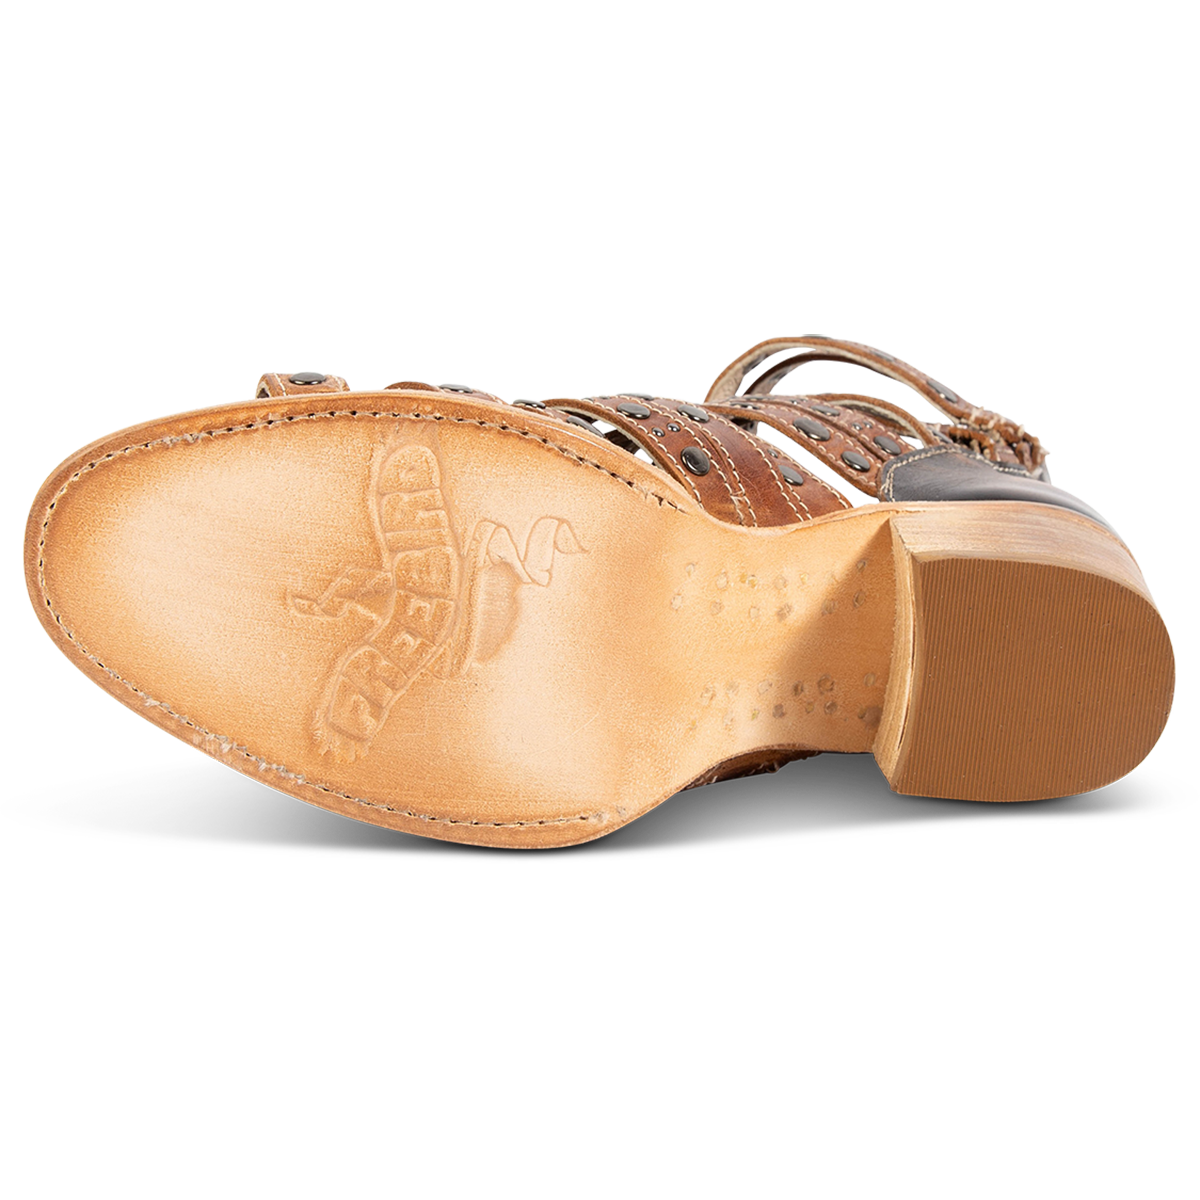 Leather sole imprinted with FREEBIRD on women's Cannes cognac leather sandal